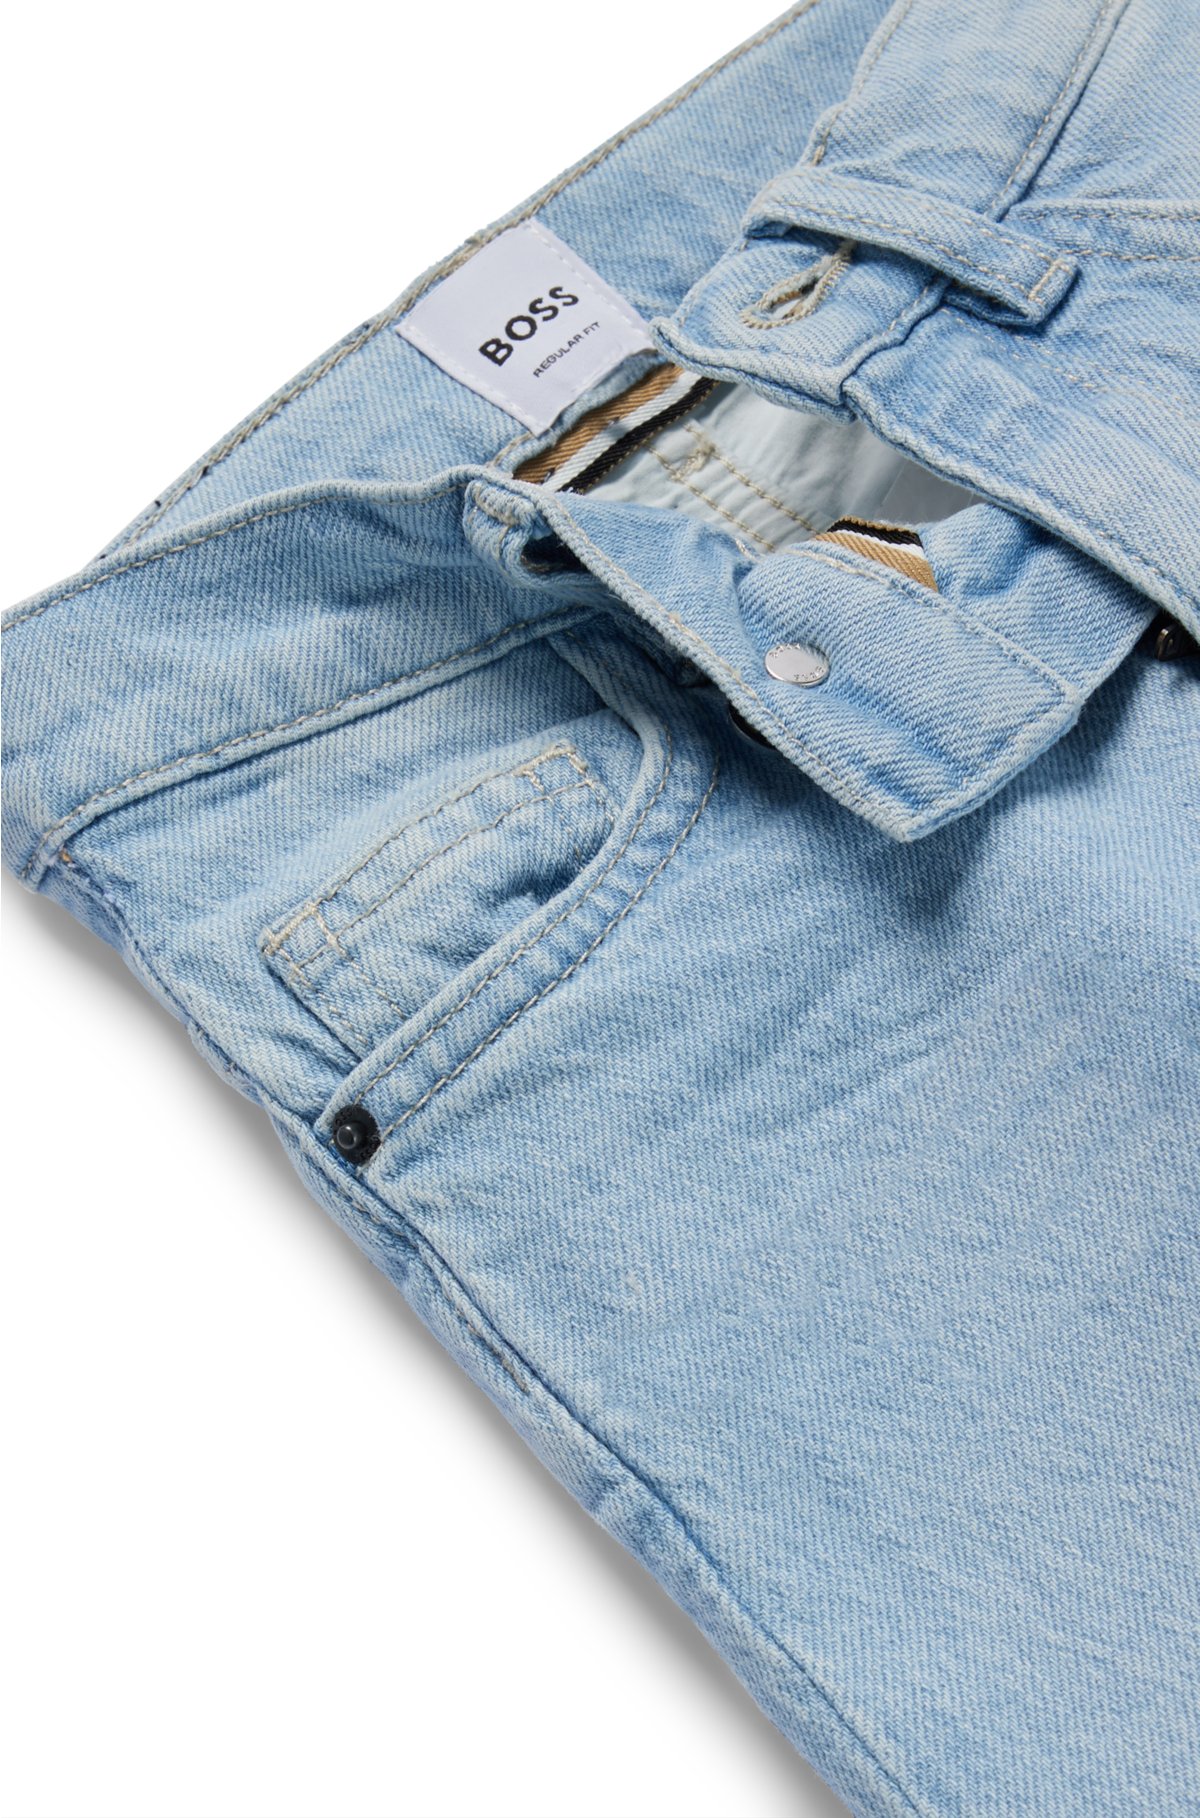 Relaxed Fit Jeans - Denim blue - Kids